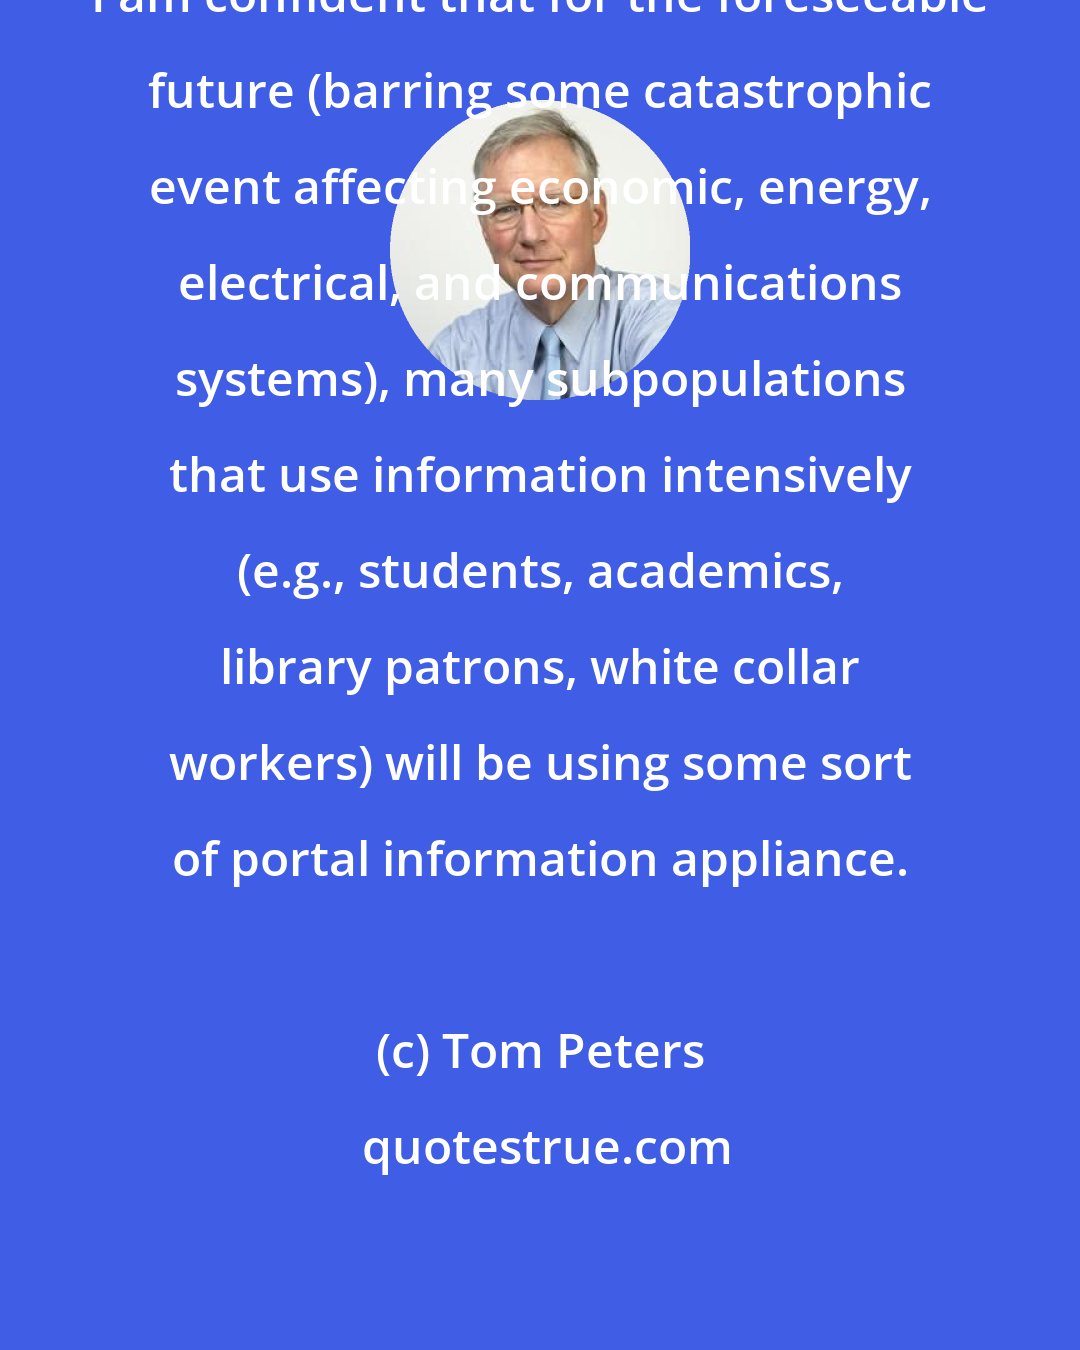 Tom Peters: I am confident that for the foreseeable future (barring some catastrophic event affecting economic, energy, electrical, and communications systems), many subpopulations that use information intensively (e.g., students, academics, library patrons, white collar workers) will be using some sort of portal information appliance.